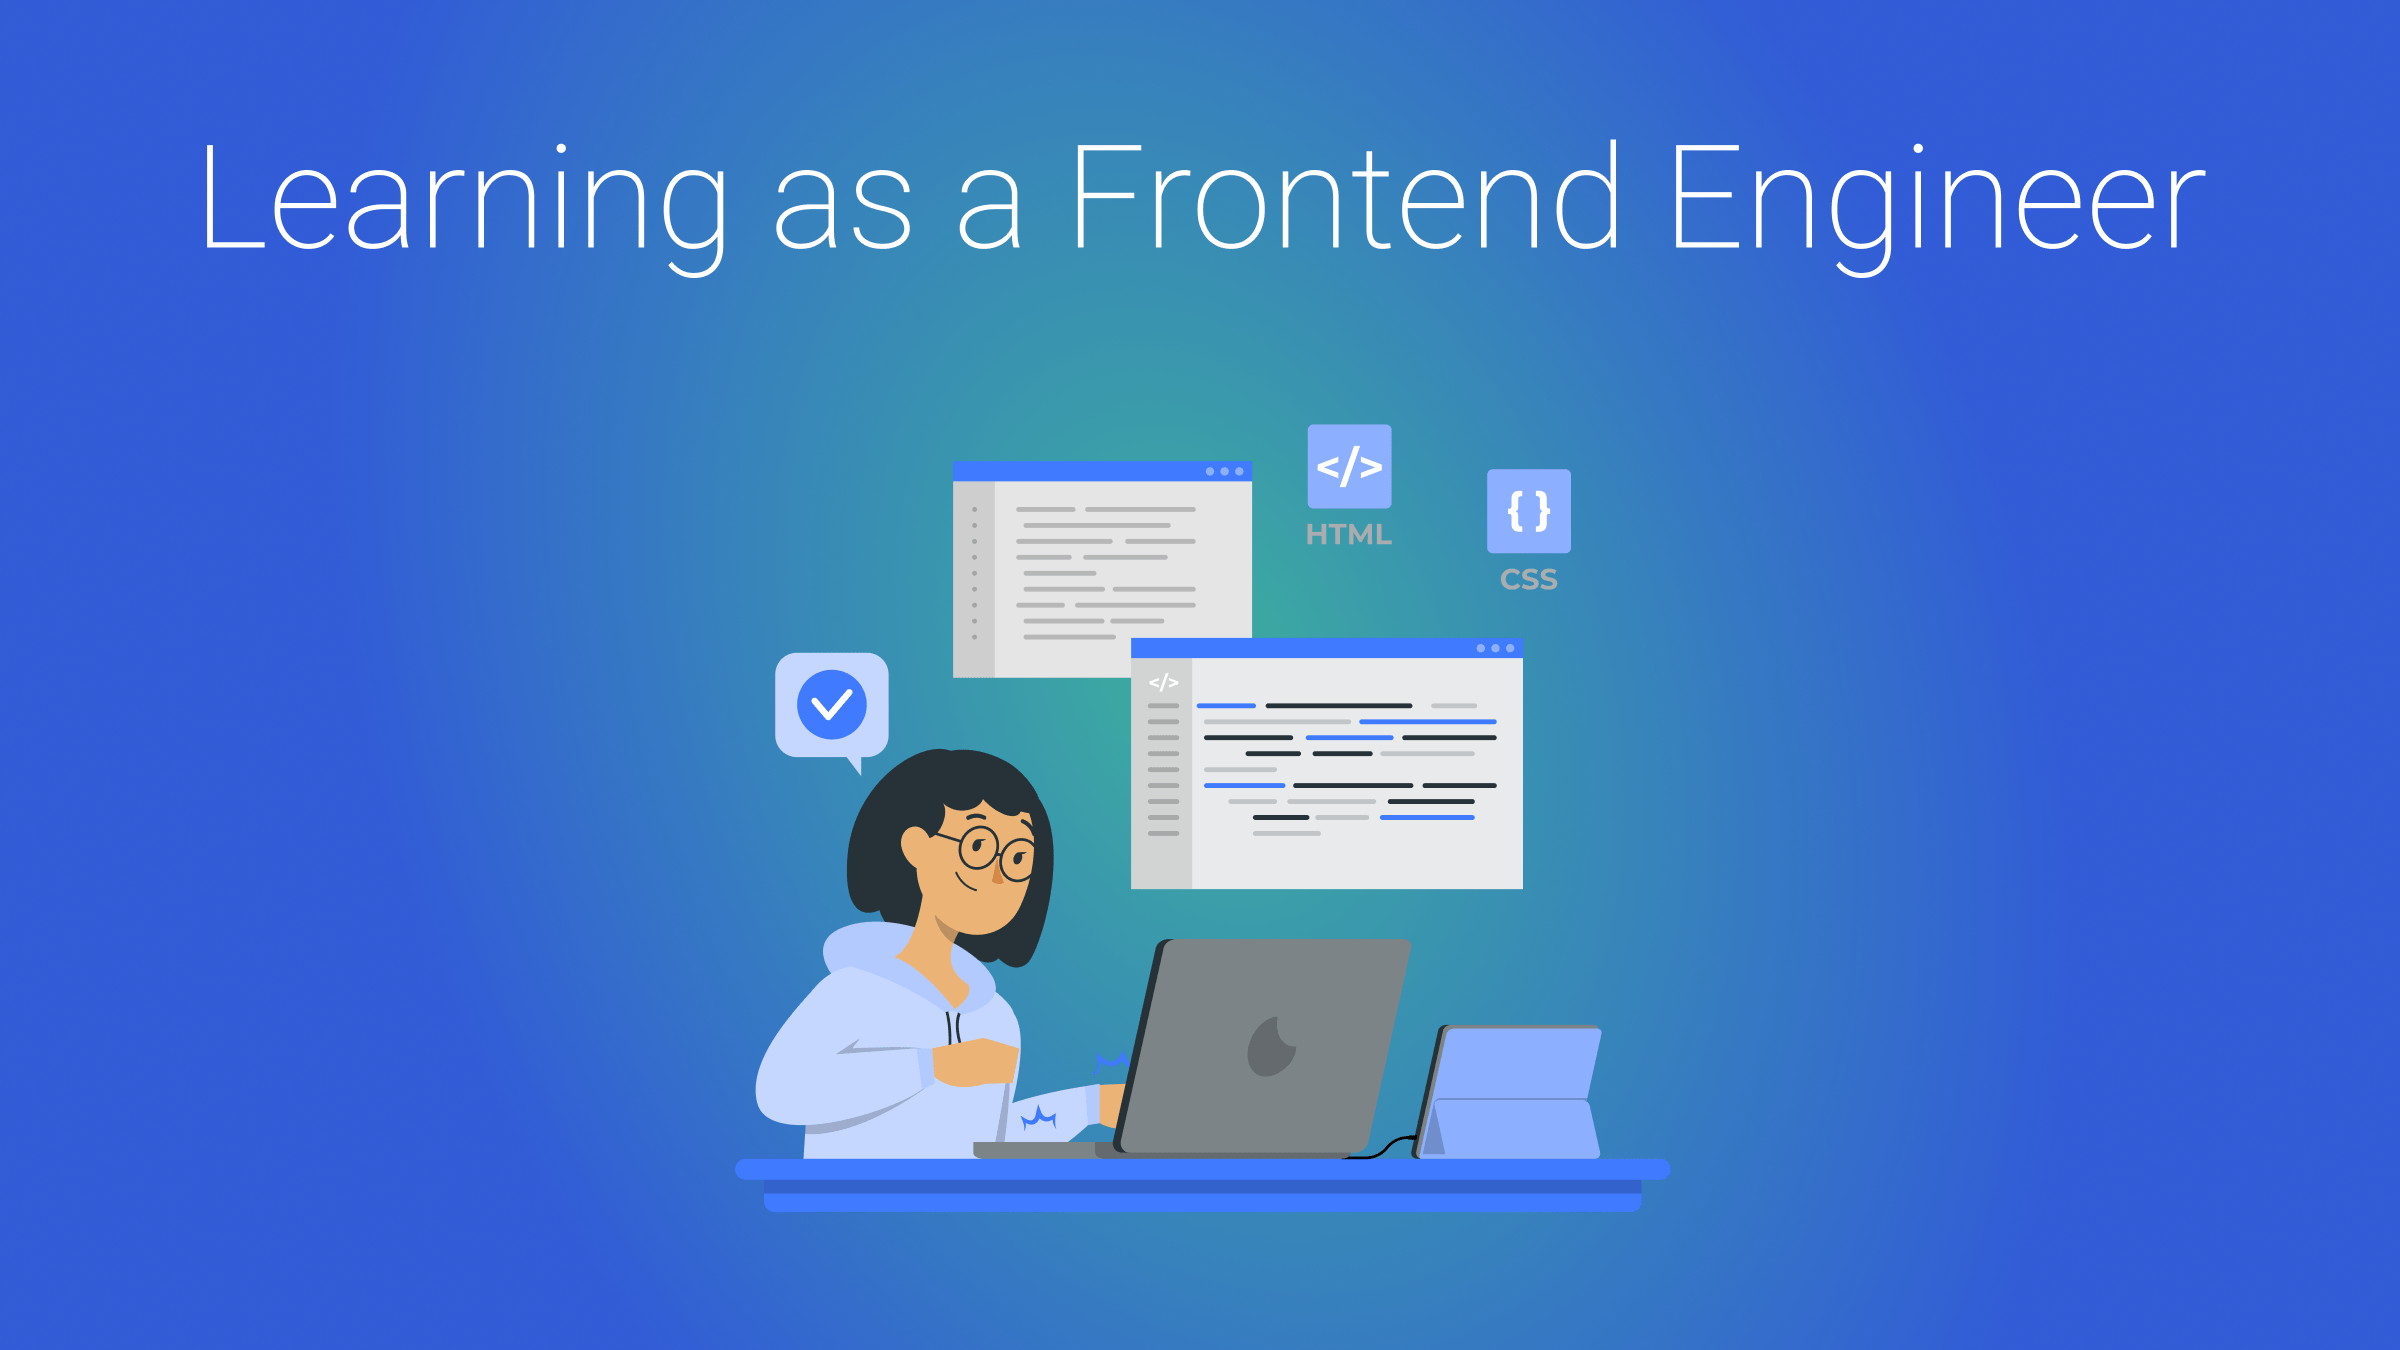 Adopting a Culture of Lifelong Learning as a Frontend Engineer